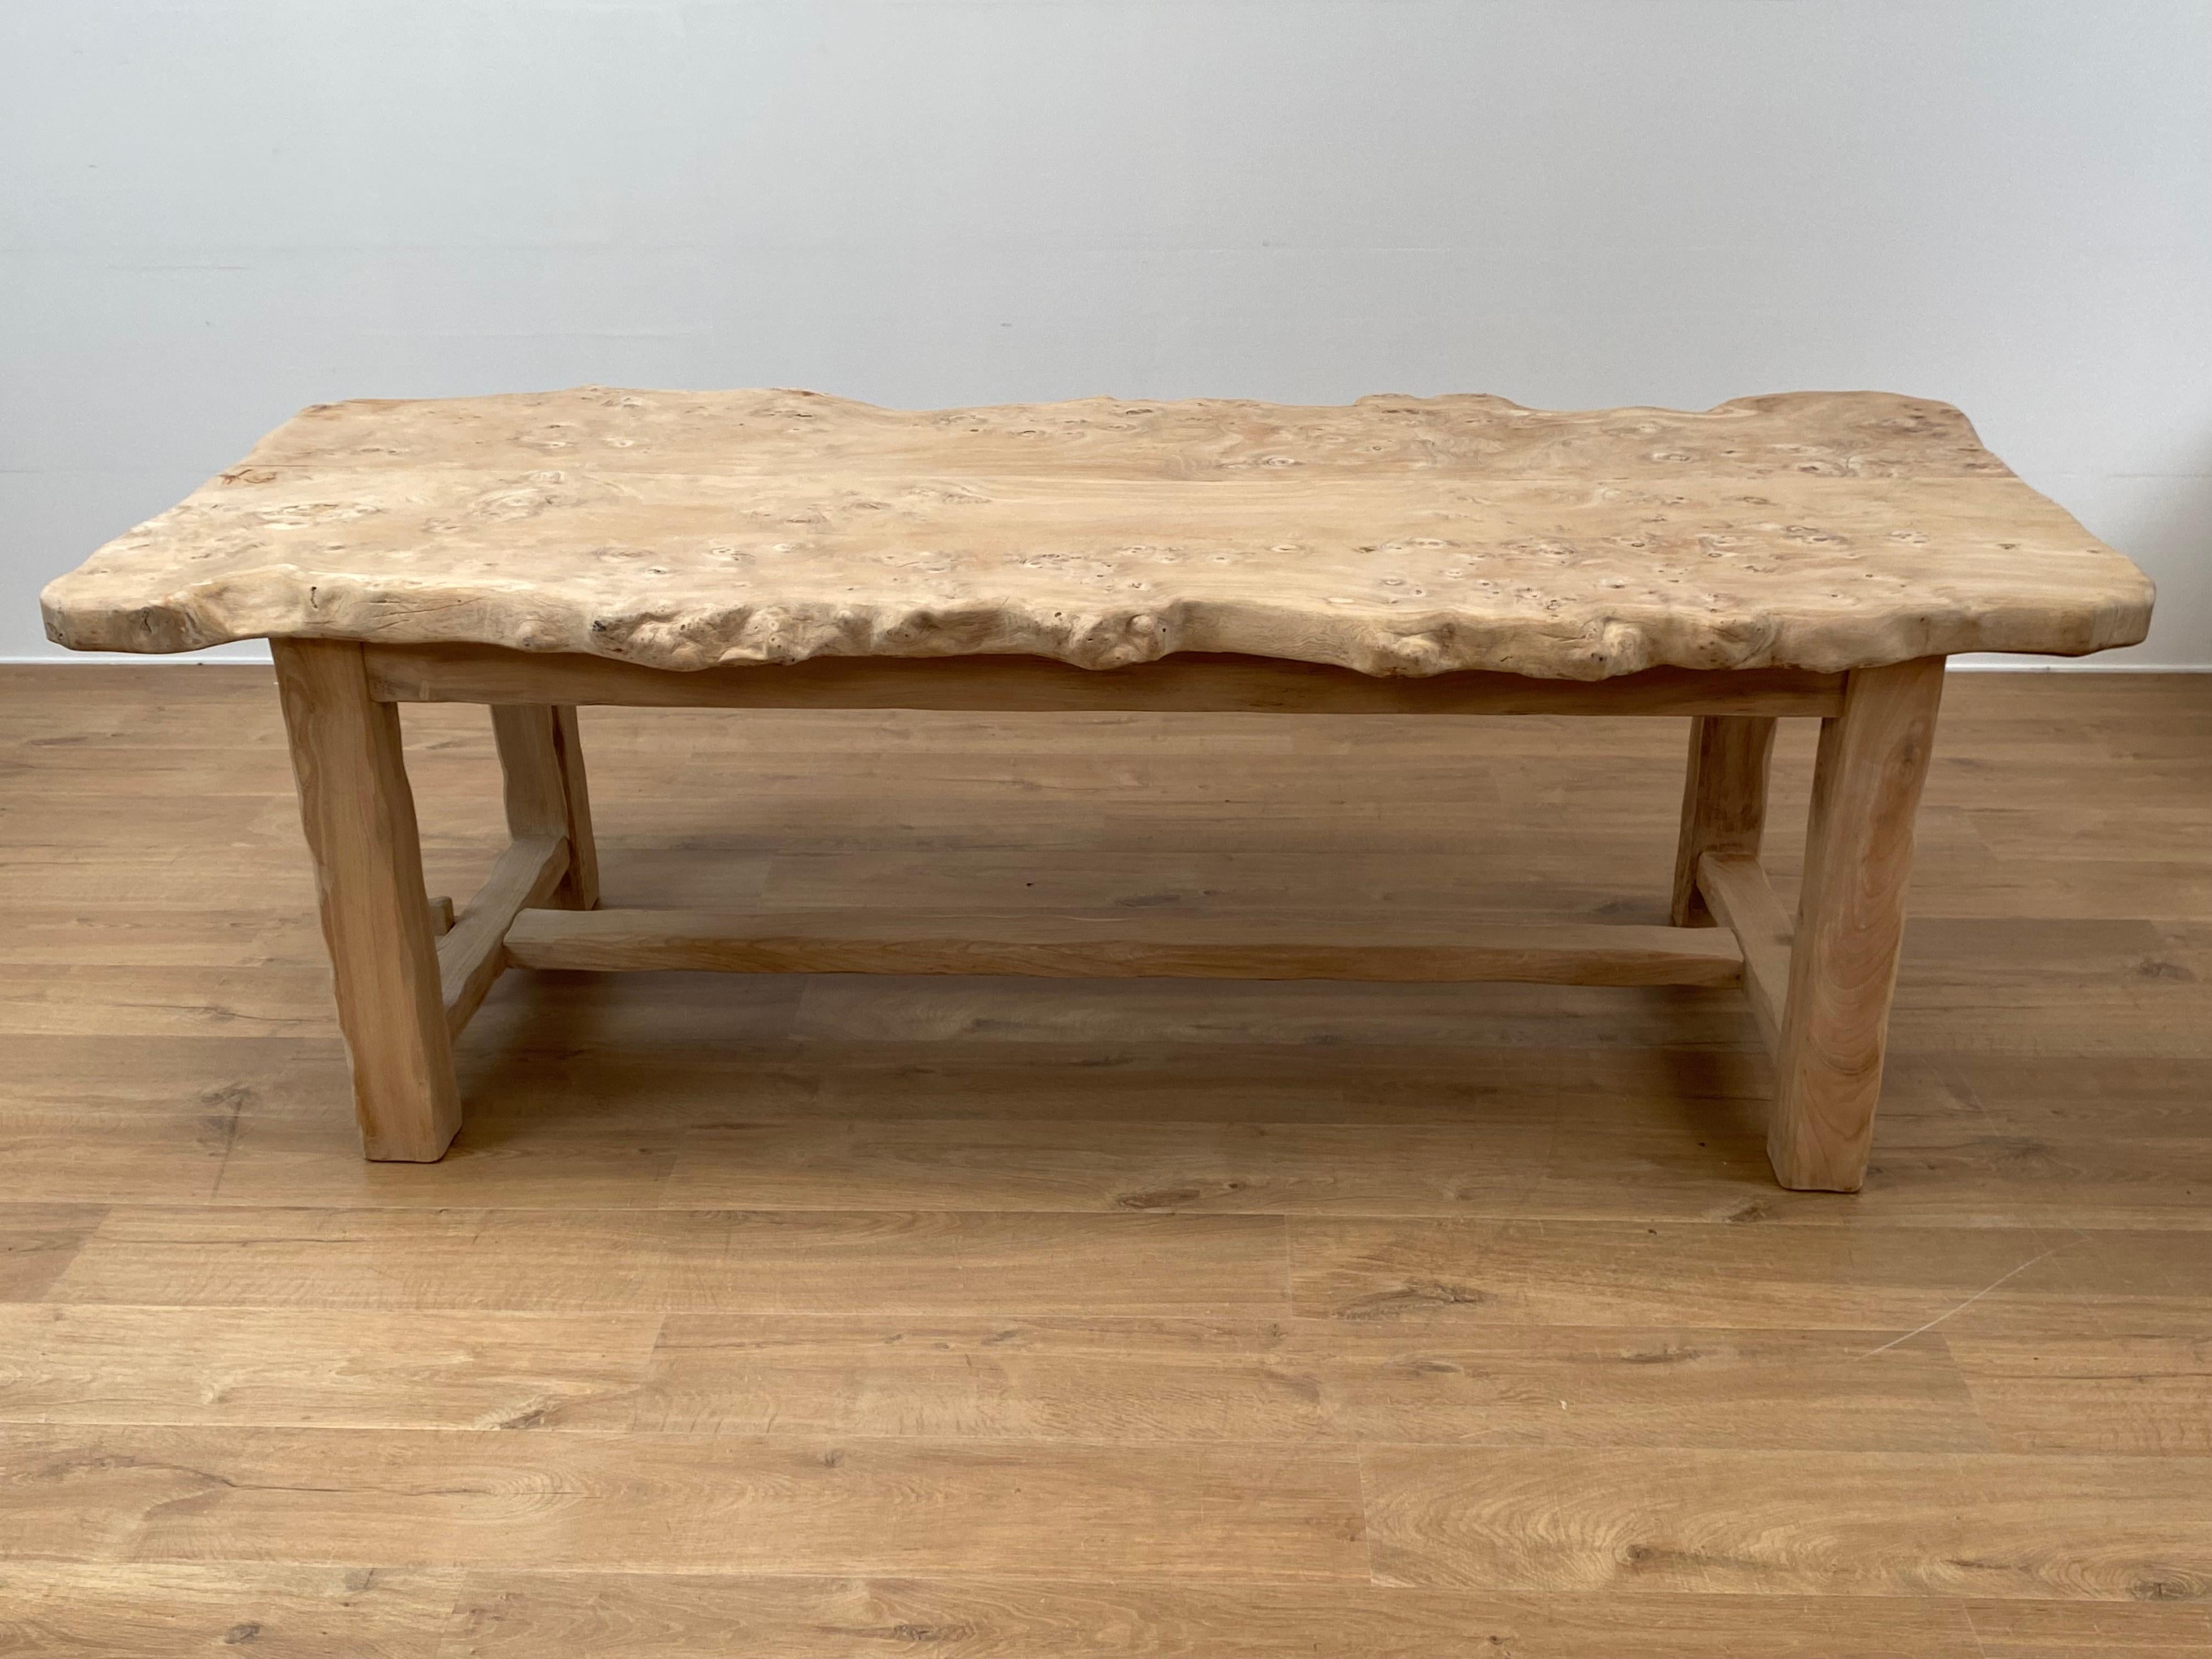 Bleached Brutalist, Rustic Wooden Table For Sale